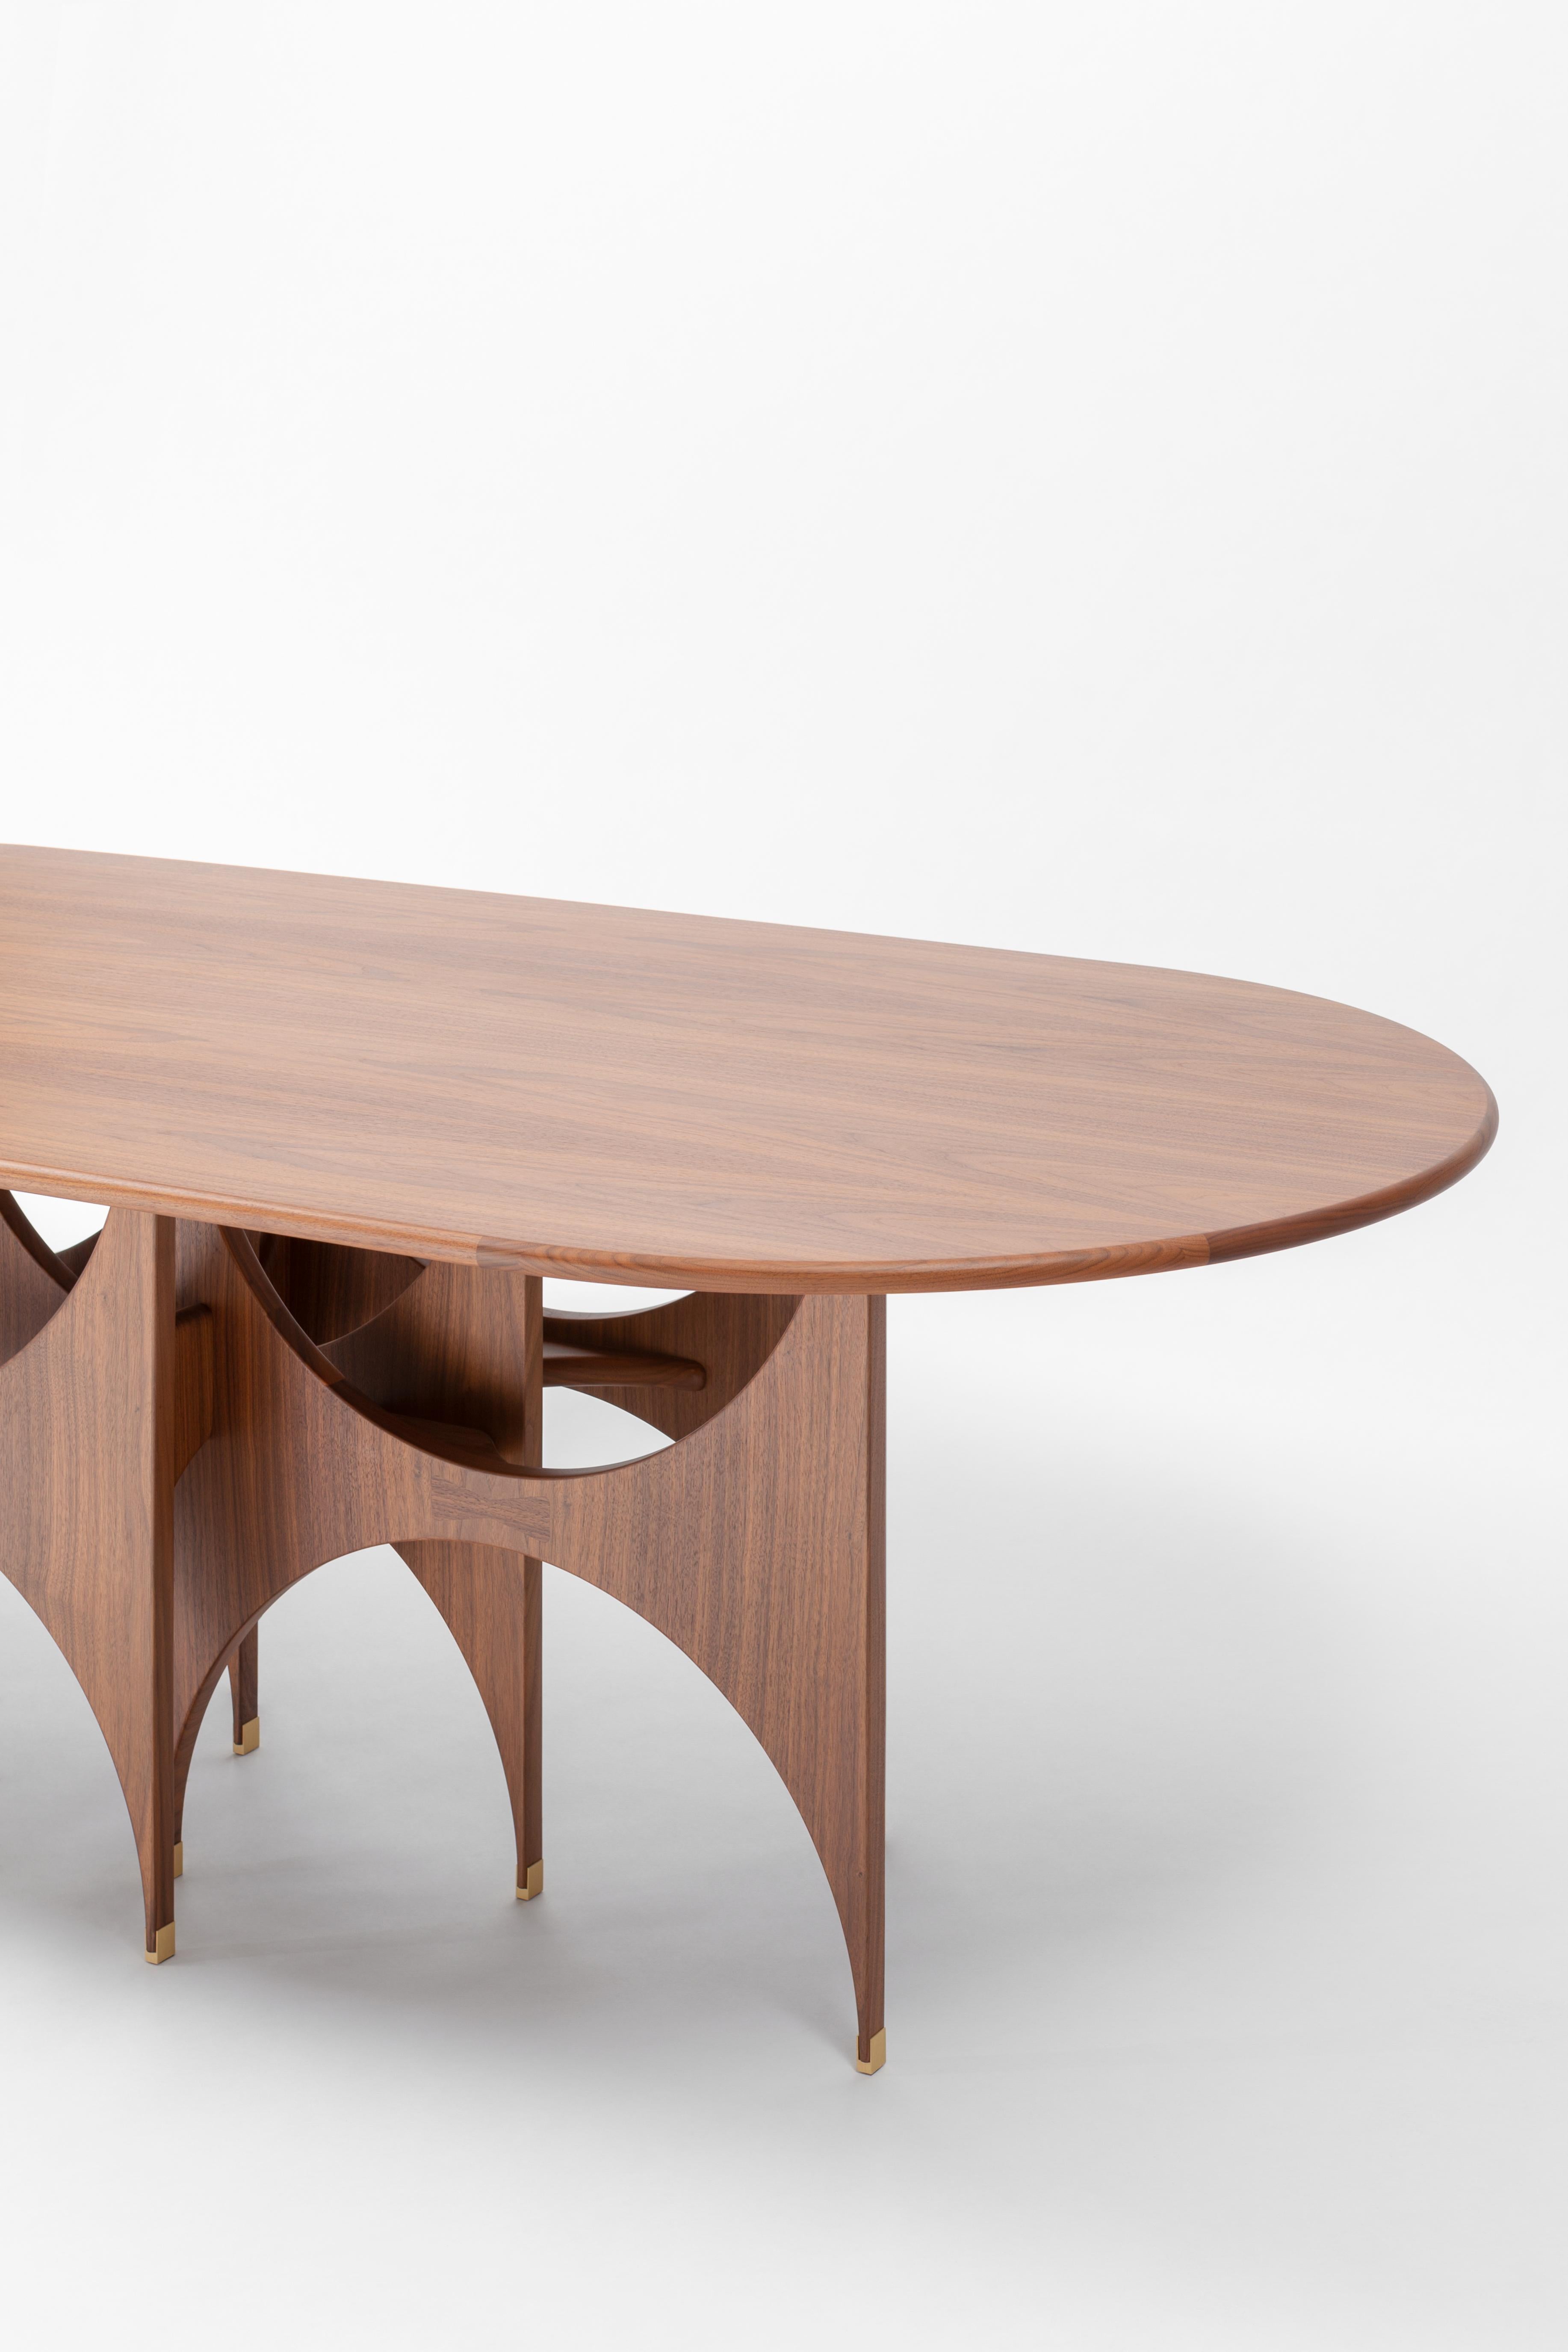 Other Contemporary Oblong Table Butterfly by Hannes Peer For Sale